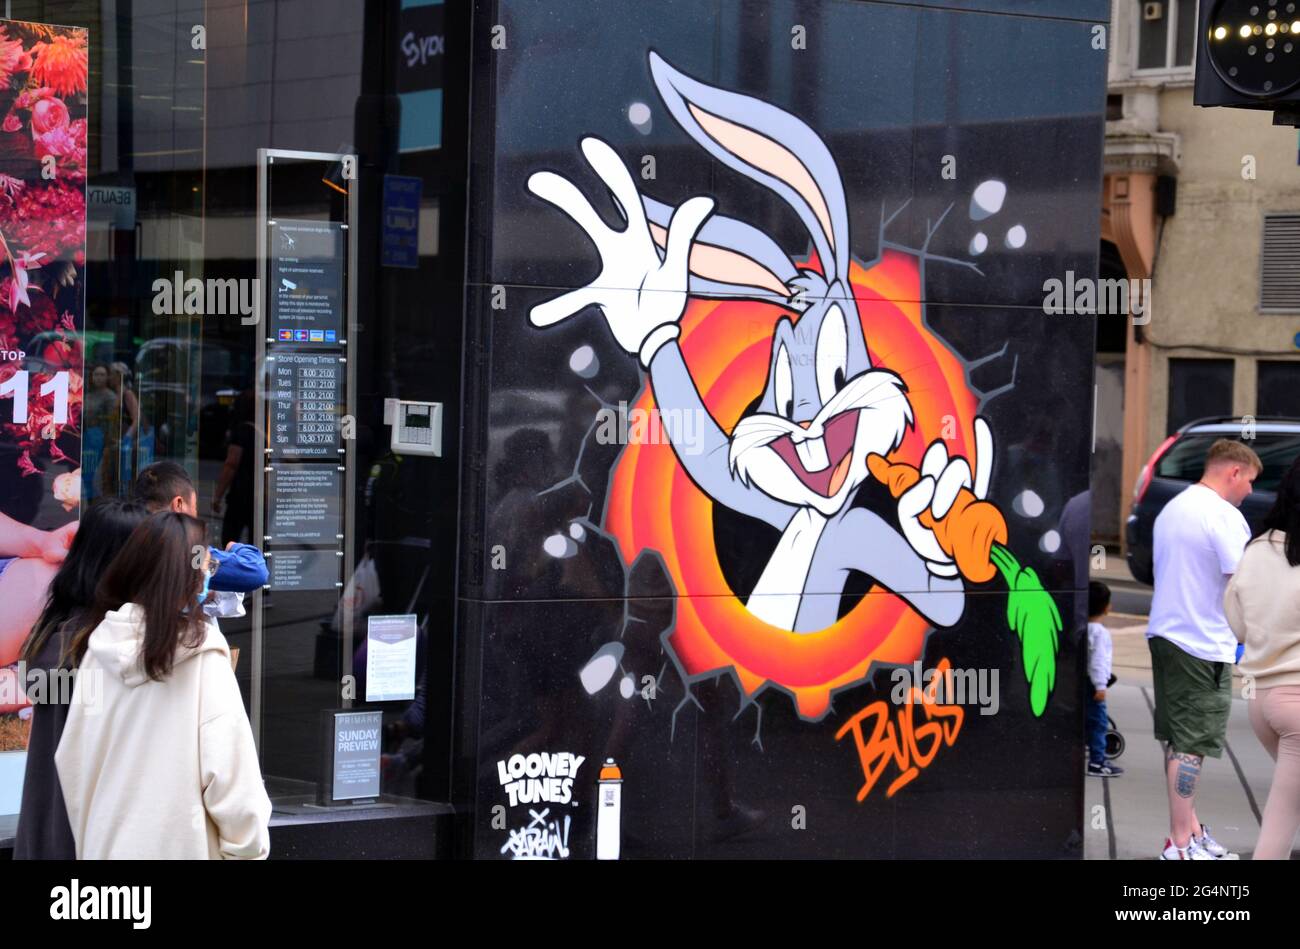 Passers - by near a Bugs Bunny image, part of a Looney Tunes art trail which has opened in Manchester, England, United Kingdom. The trail will mark the film Space Jam: A New Legacy which will be in cinemas in Manchester soon. The cartoon images appear in 12 locations in Manchester. Stock Photo